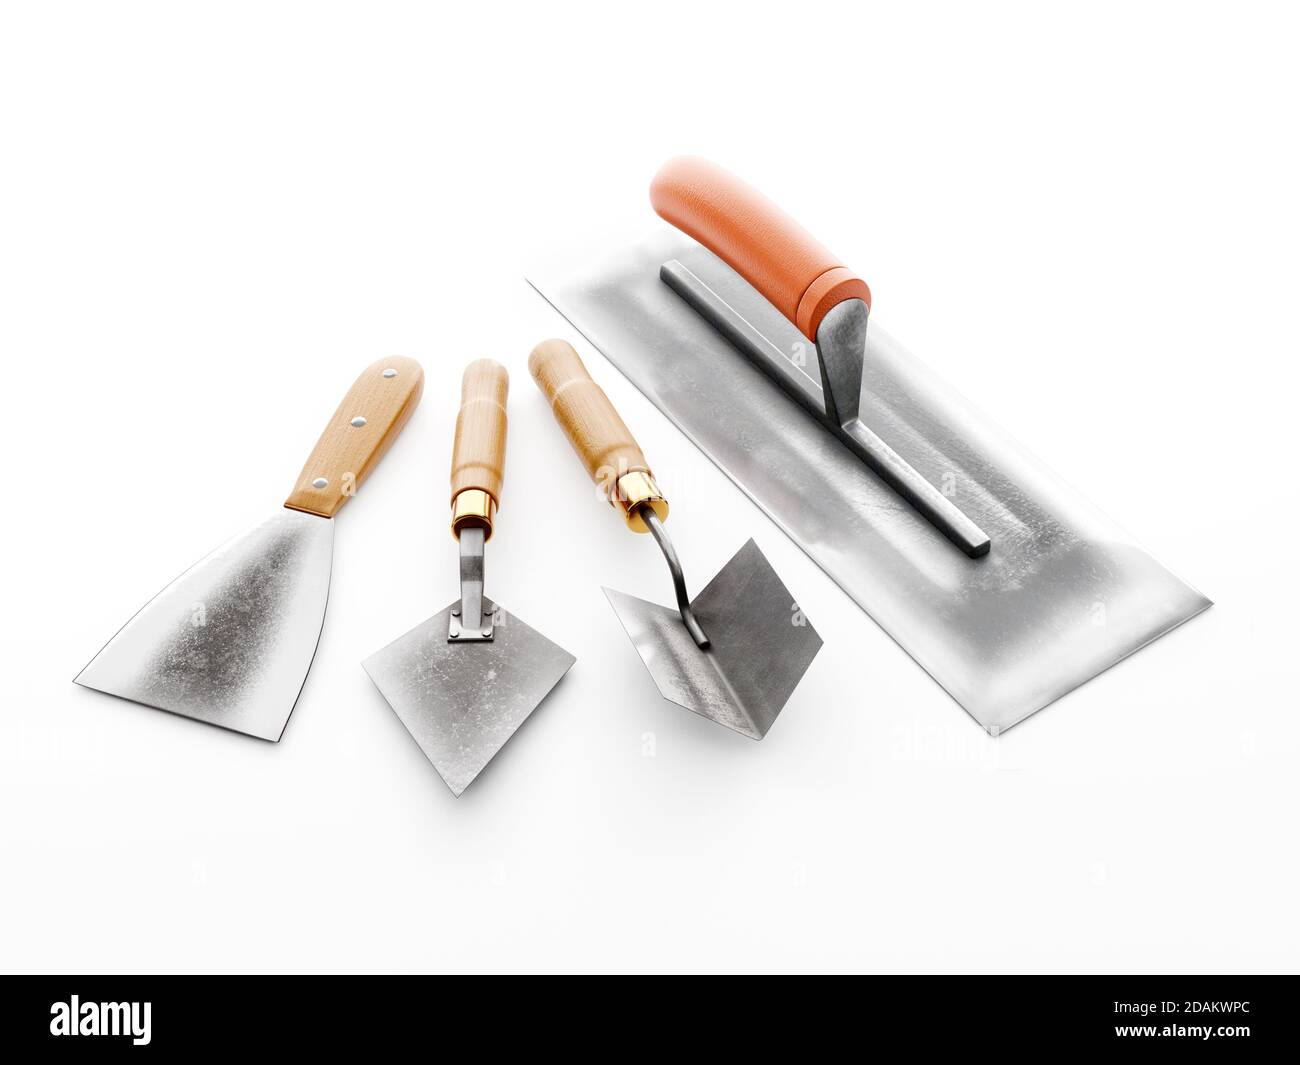 Plasterer's basic tools - stainless steel large trowel, small trowel,  corner trowel and scraper on white background Stock Photo - Alamy